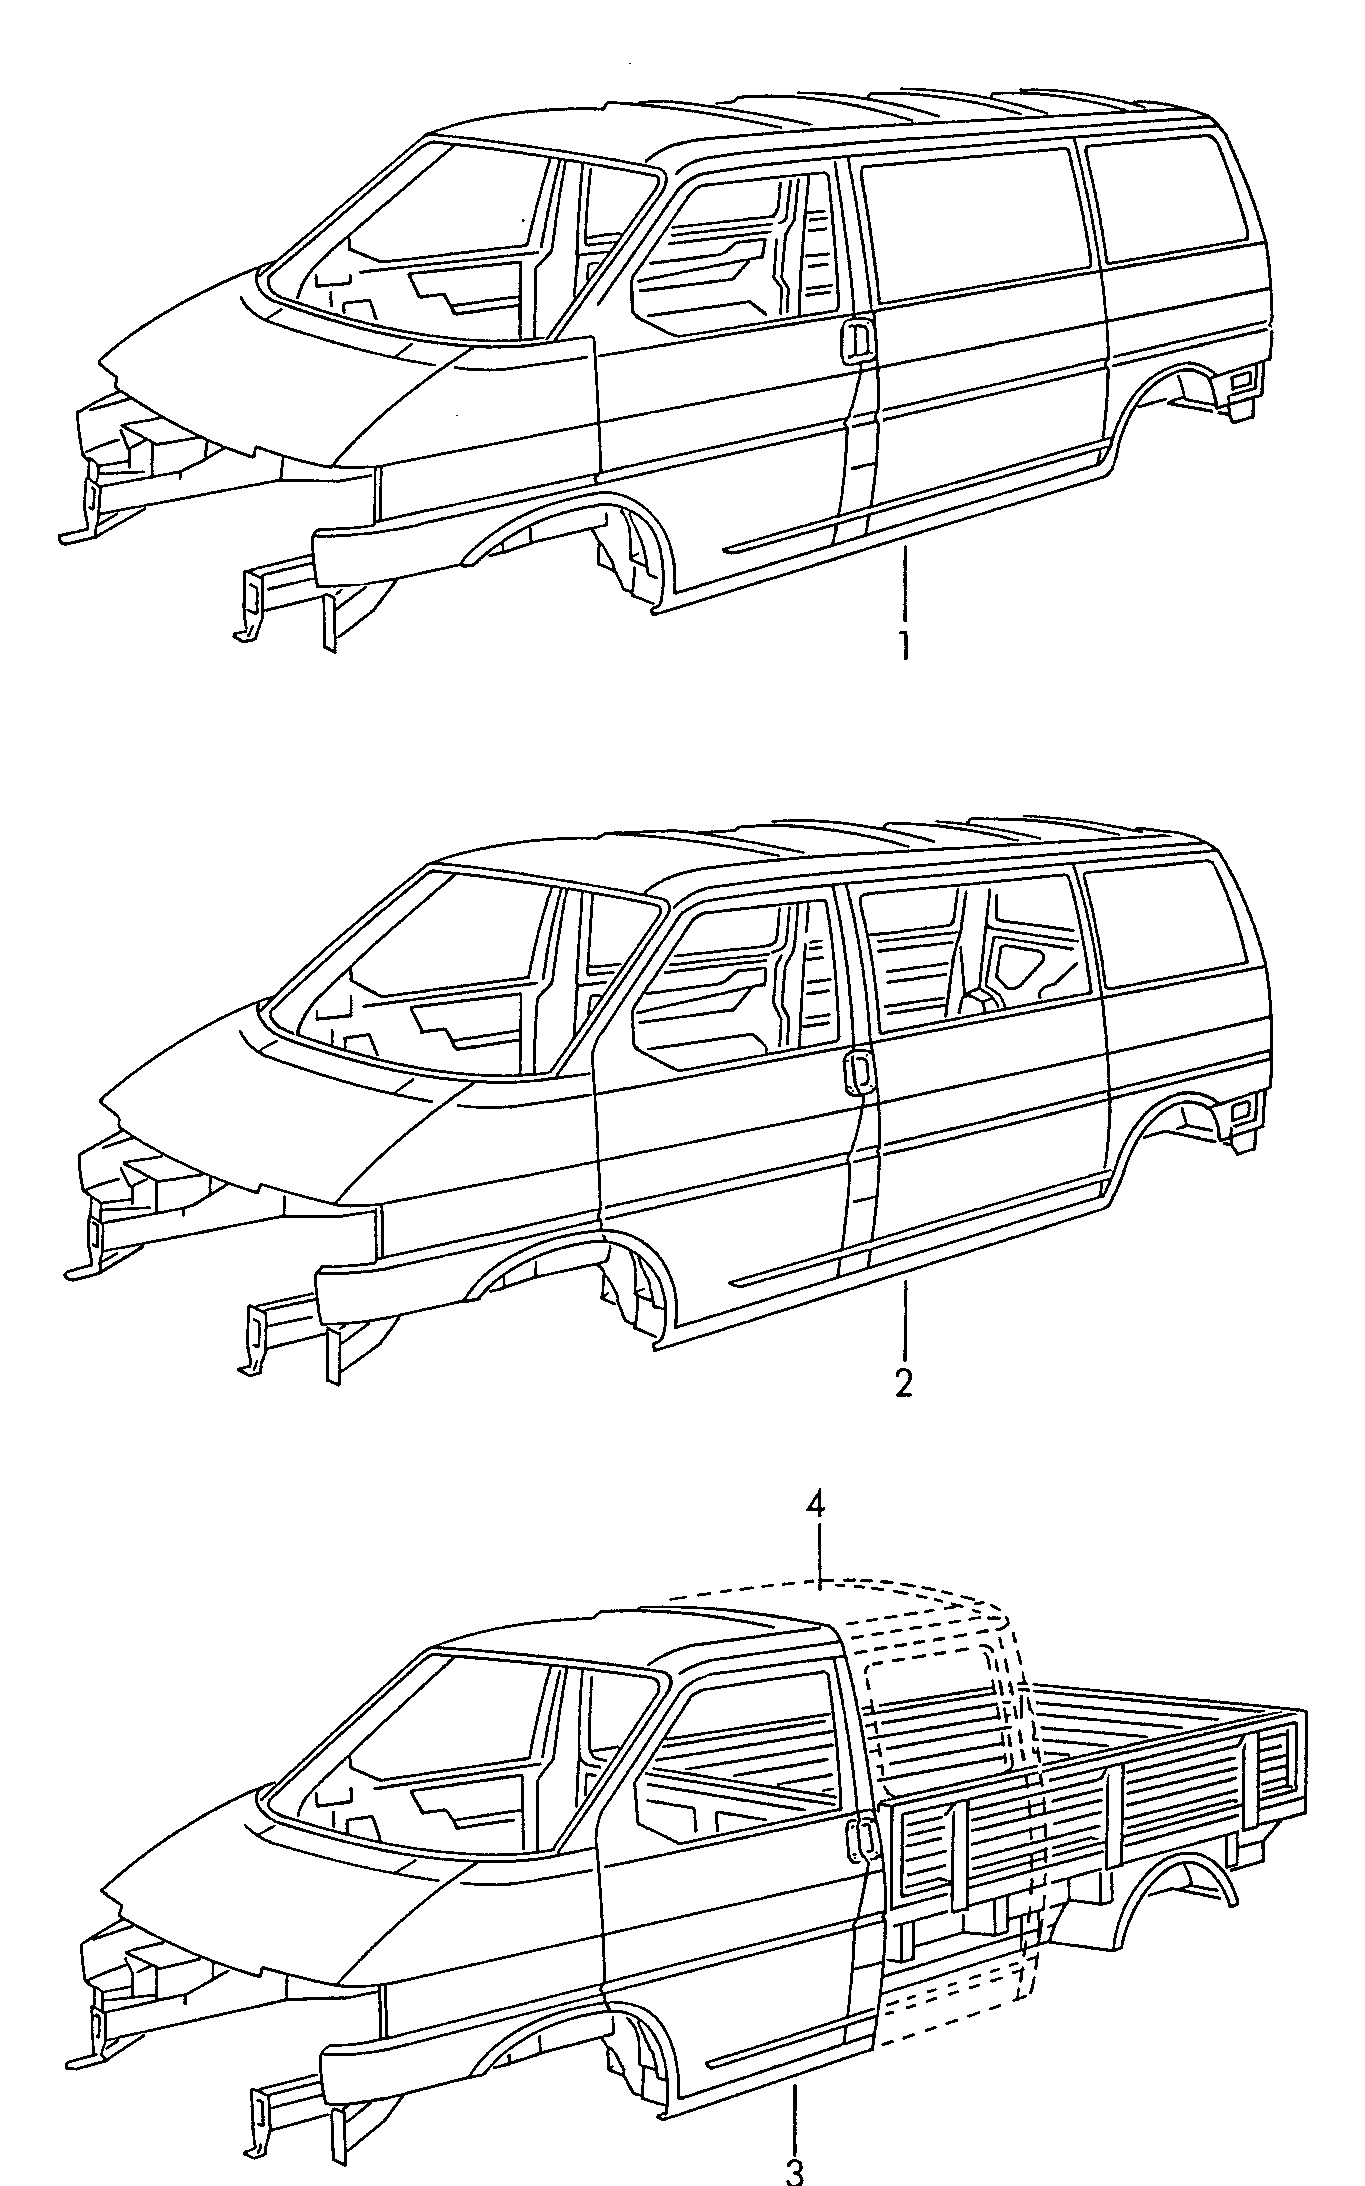 Bodywork primed, with<br>lids and doors, foam filled<br>and underbody protectioncheck with importer when<br>ordering pr equipment not<br>listed  - Transporter syncro - trsy